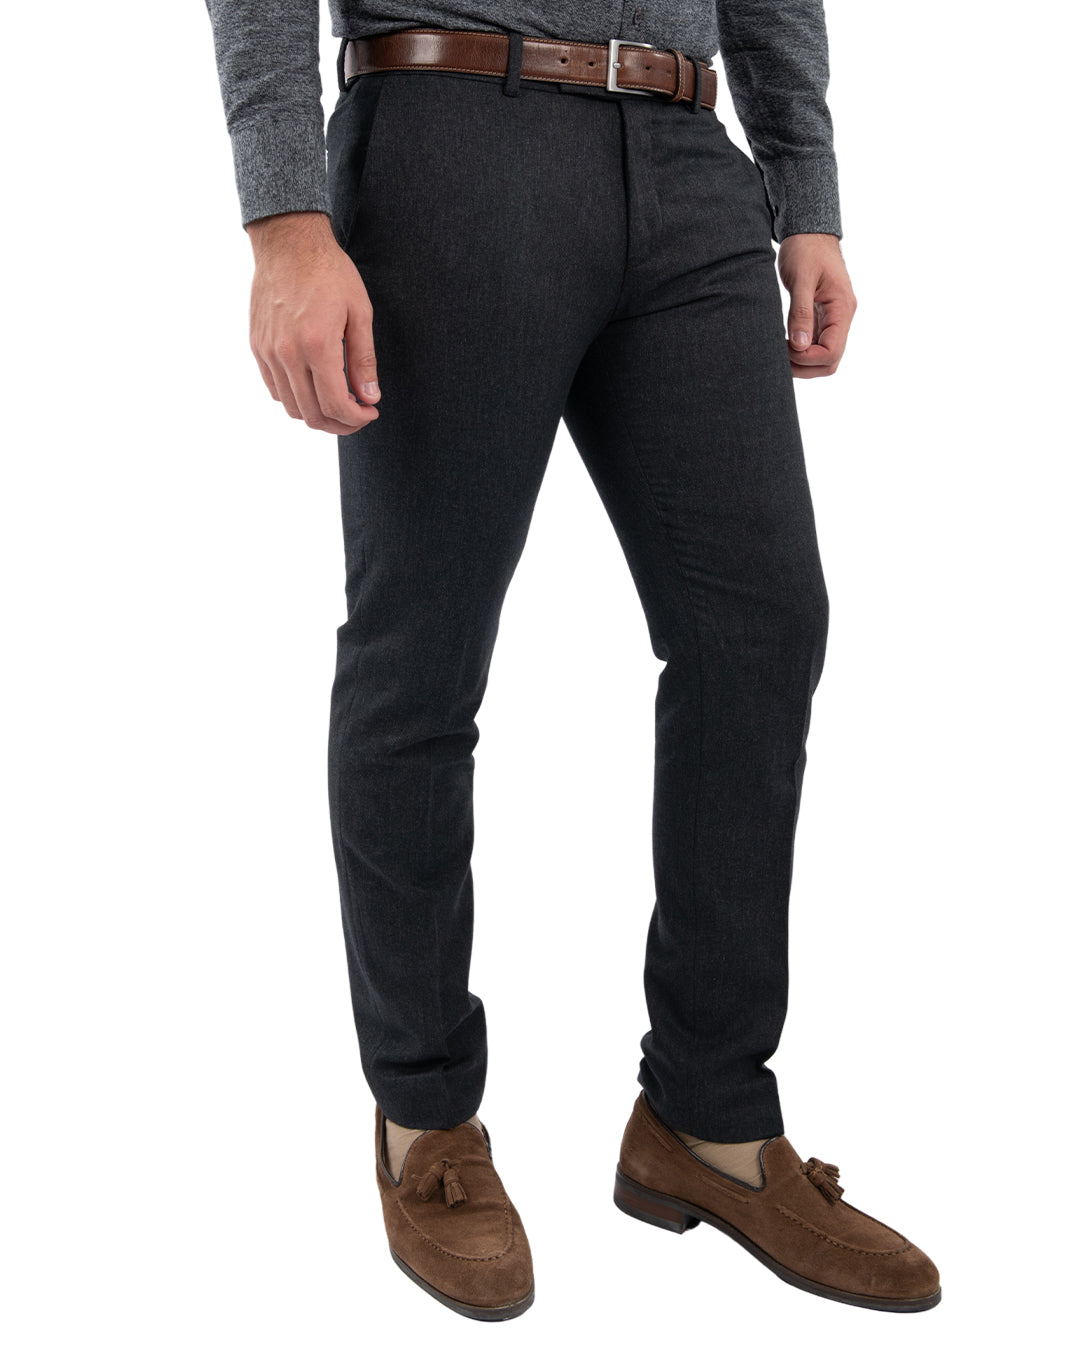 Charcoal Wool Blend Stretch Trousers